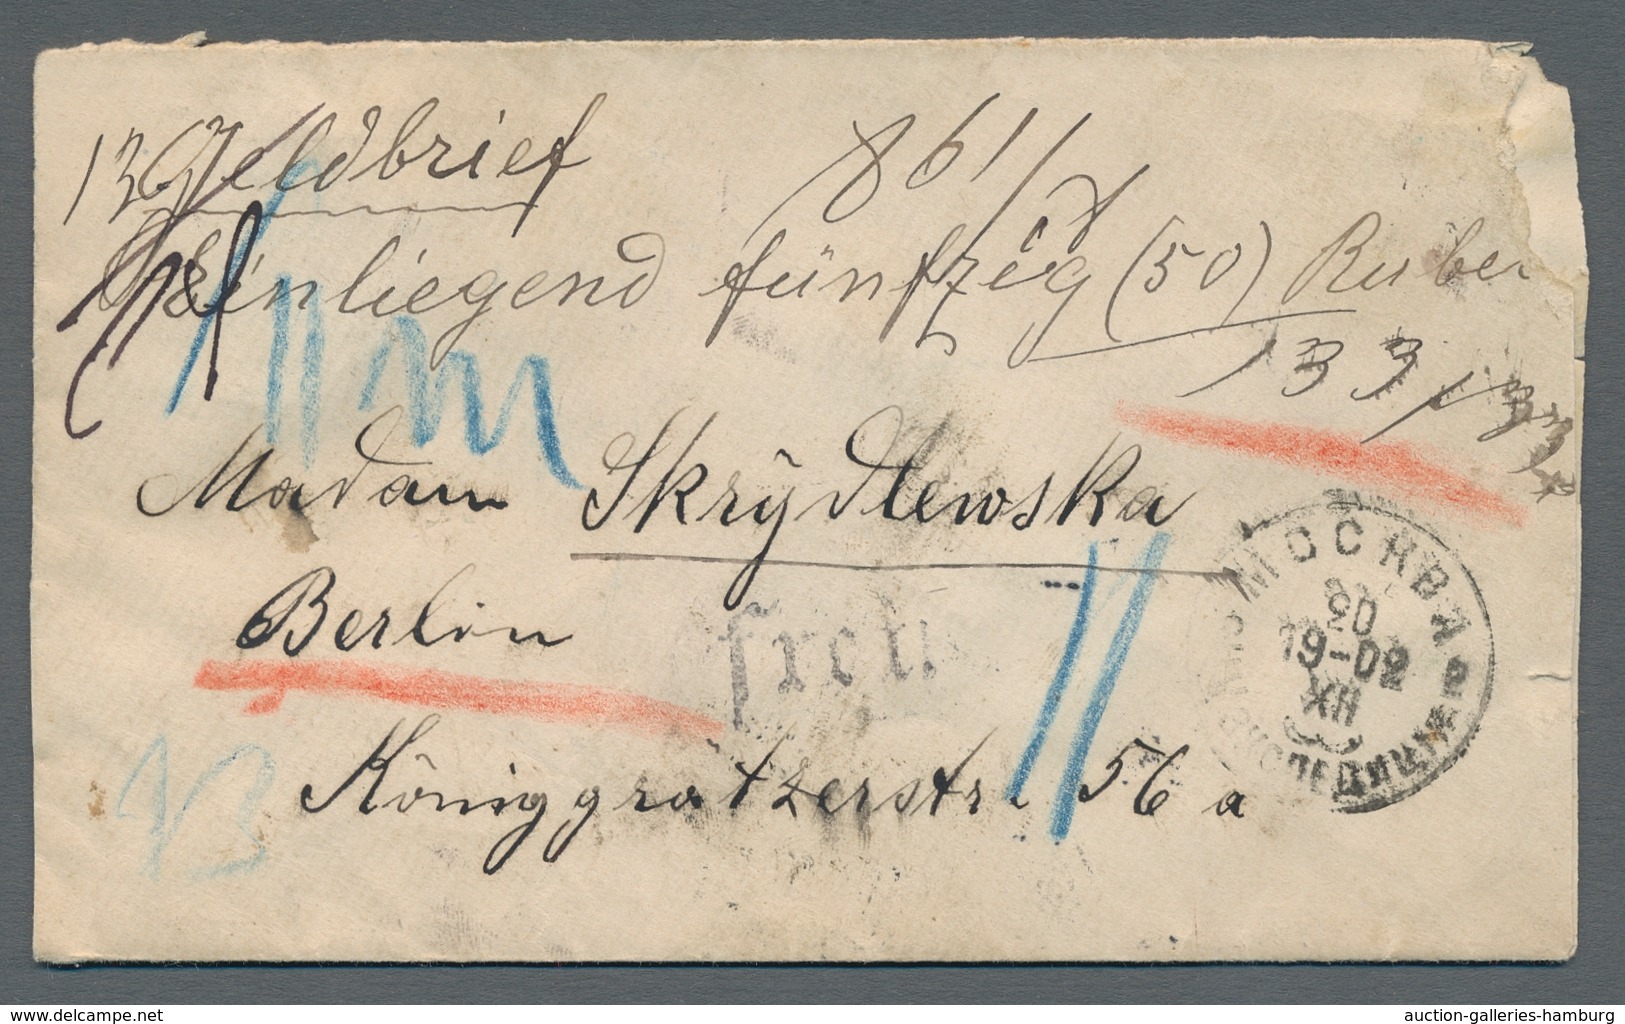 Russland: 1902-03, Two Cash Franked Insured Letters From MOSKAU 20 XII 1902 Resp. LIBAVA 2 X 1903 To - Cartas & Documentos